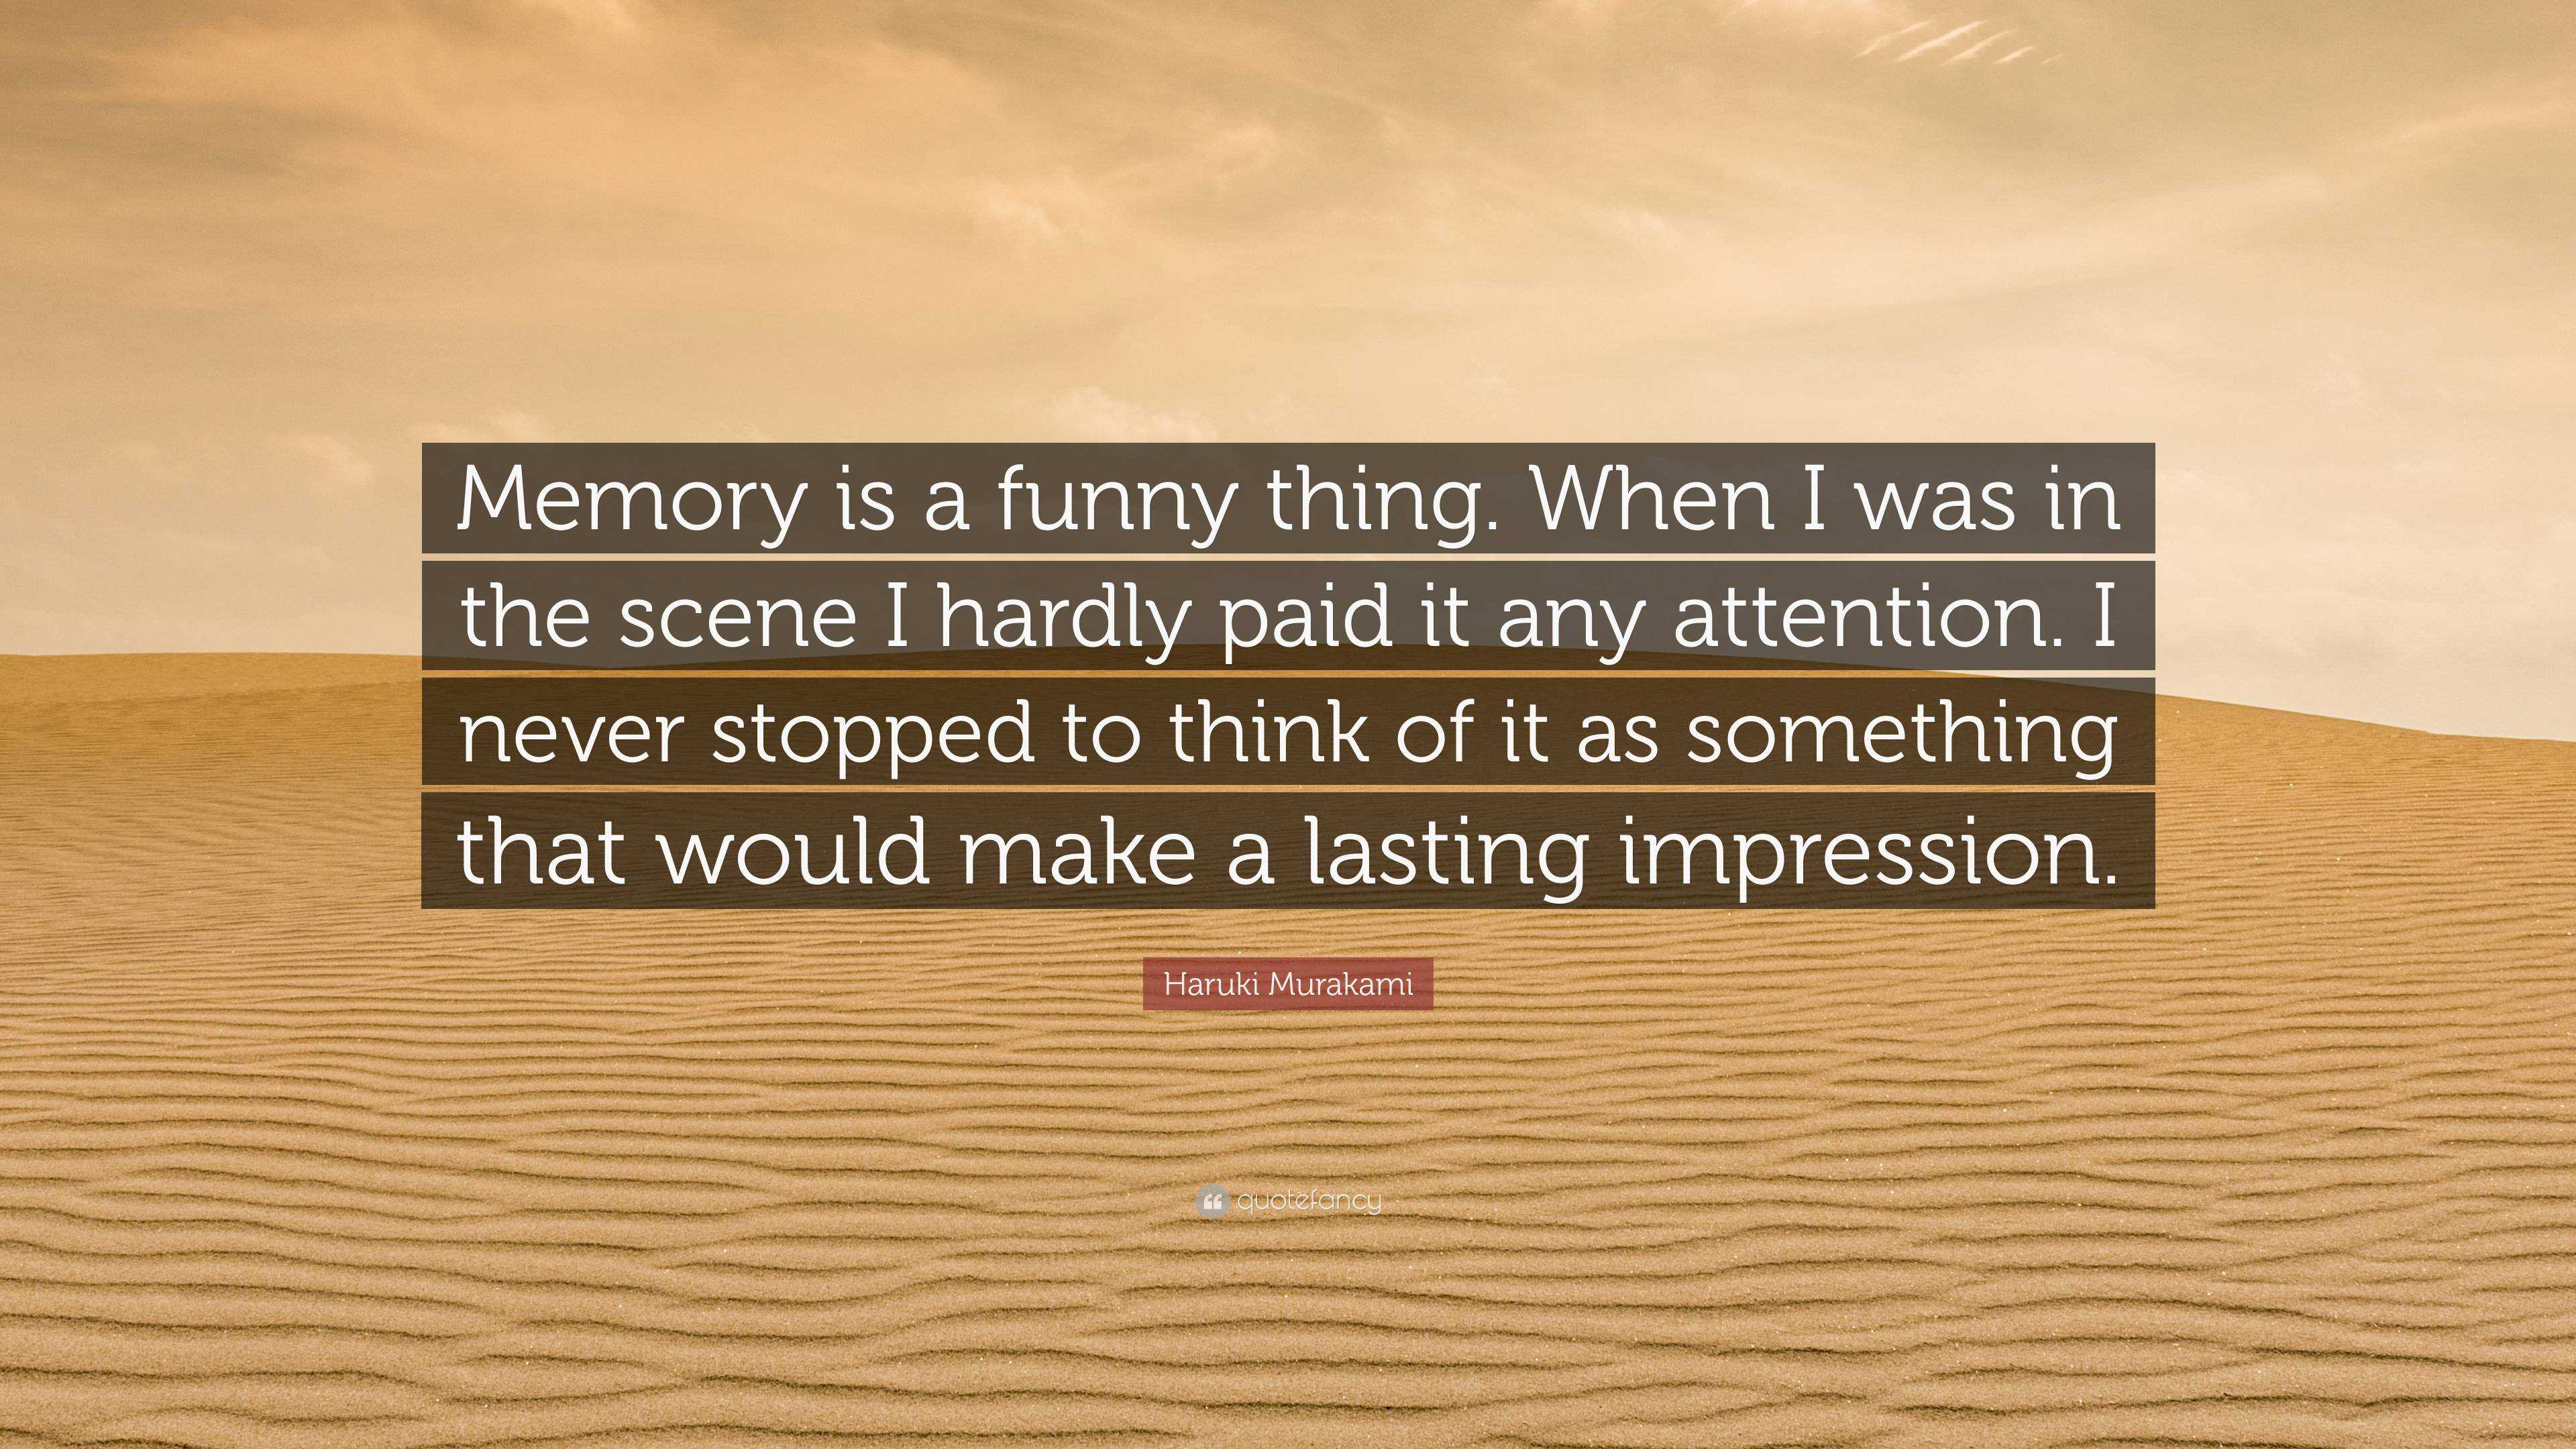 Haruki Murakami Quote: “Memory is a funny thing. When I was in the scene I  hardly paid it any attention. I never stopped to think of it as somet...”